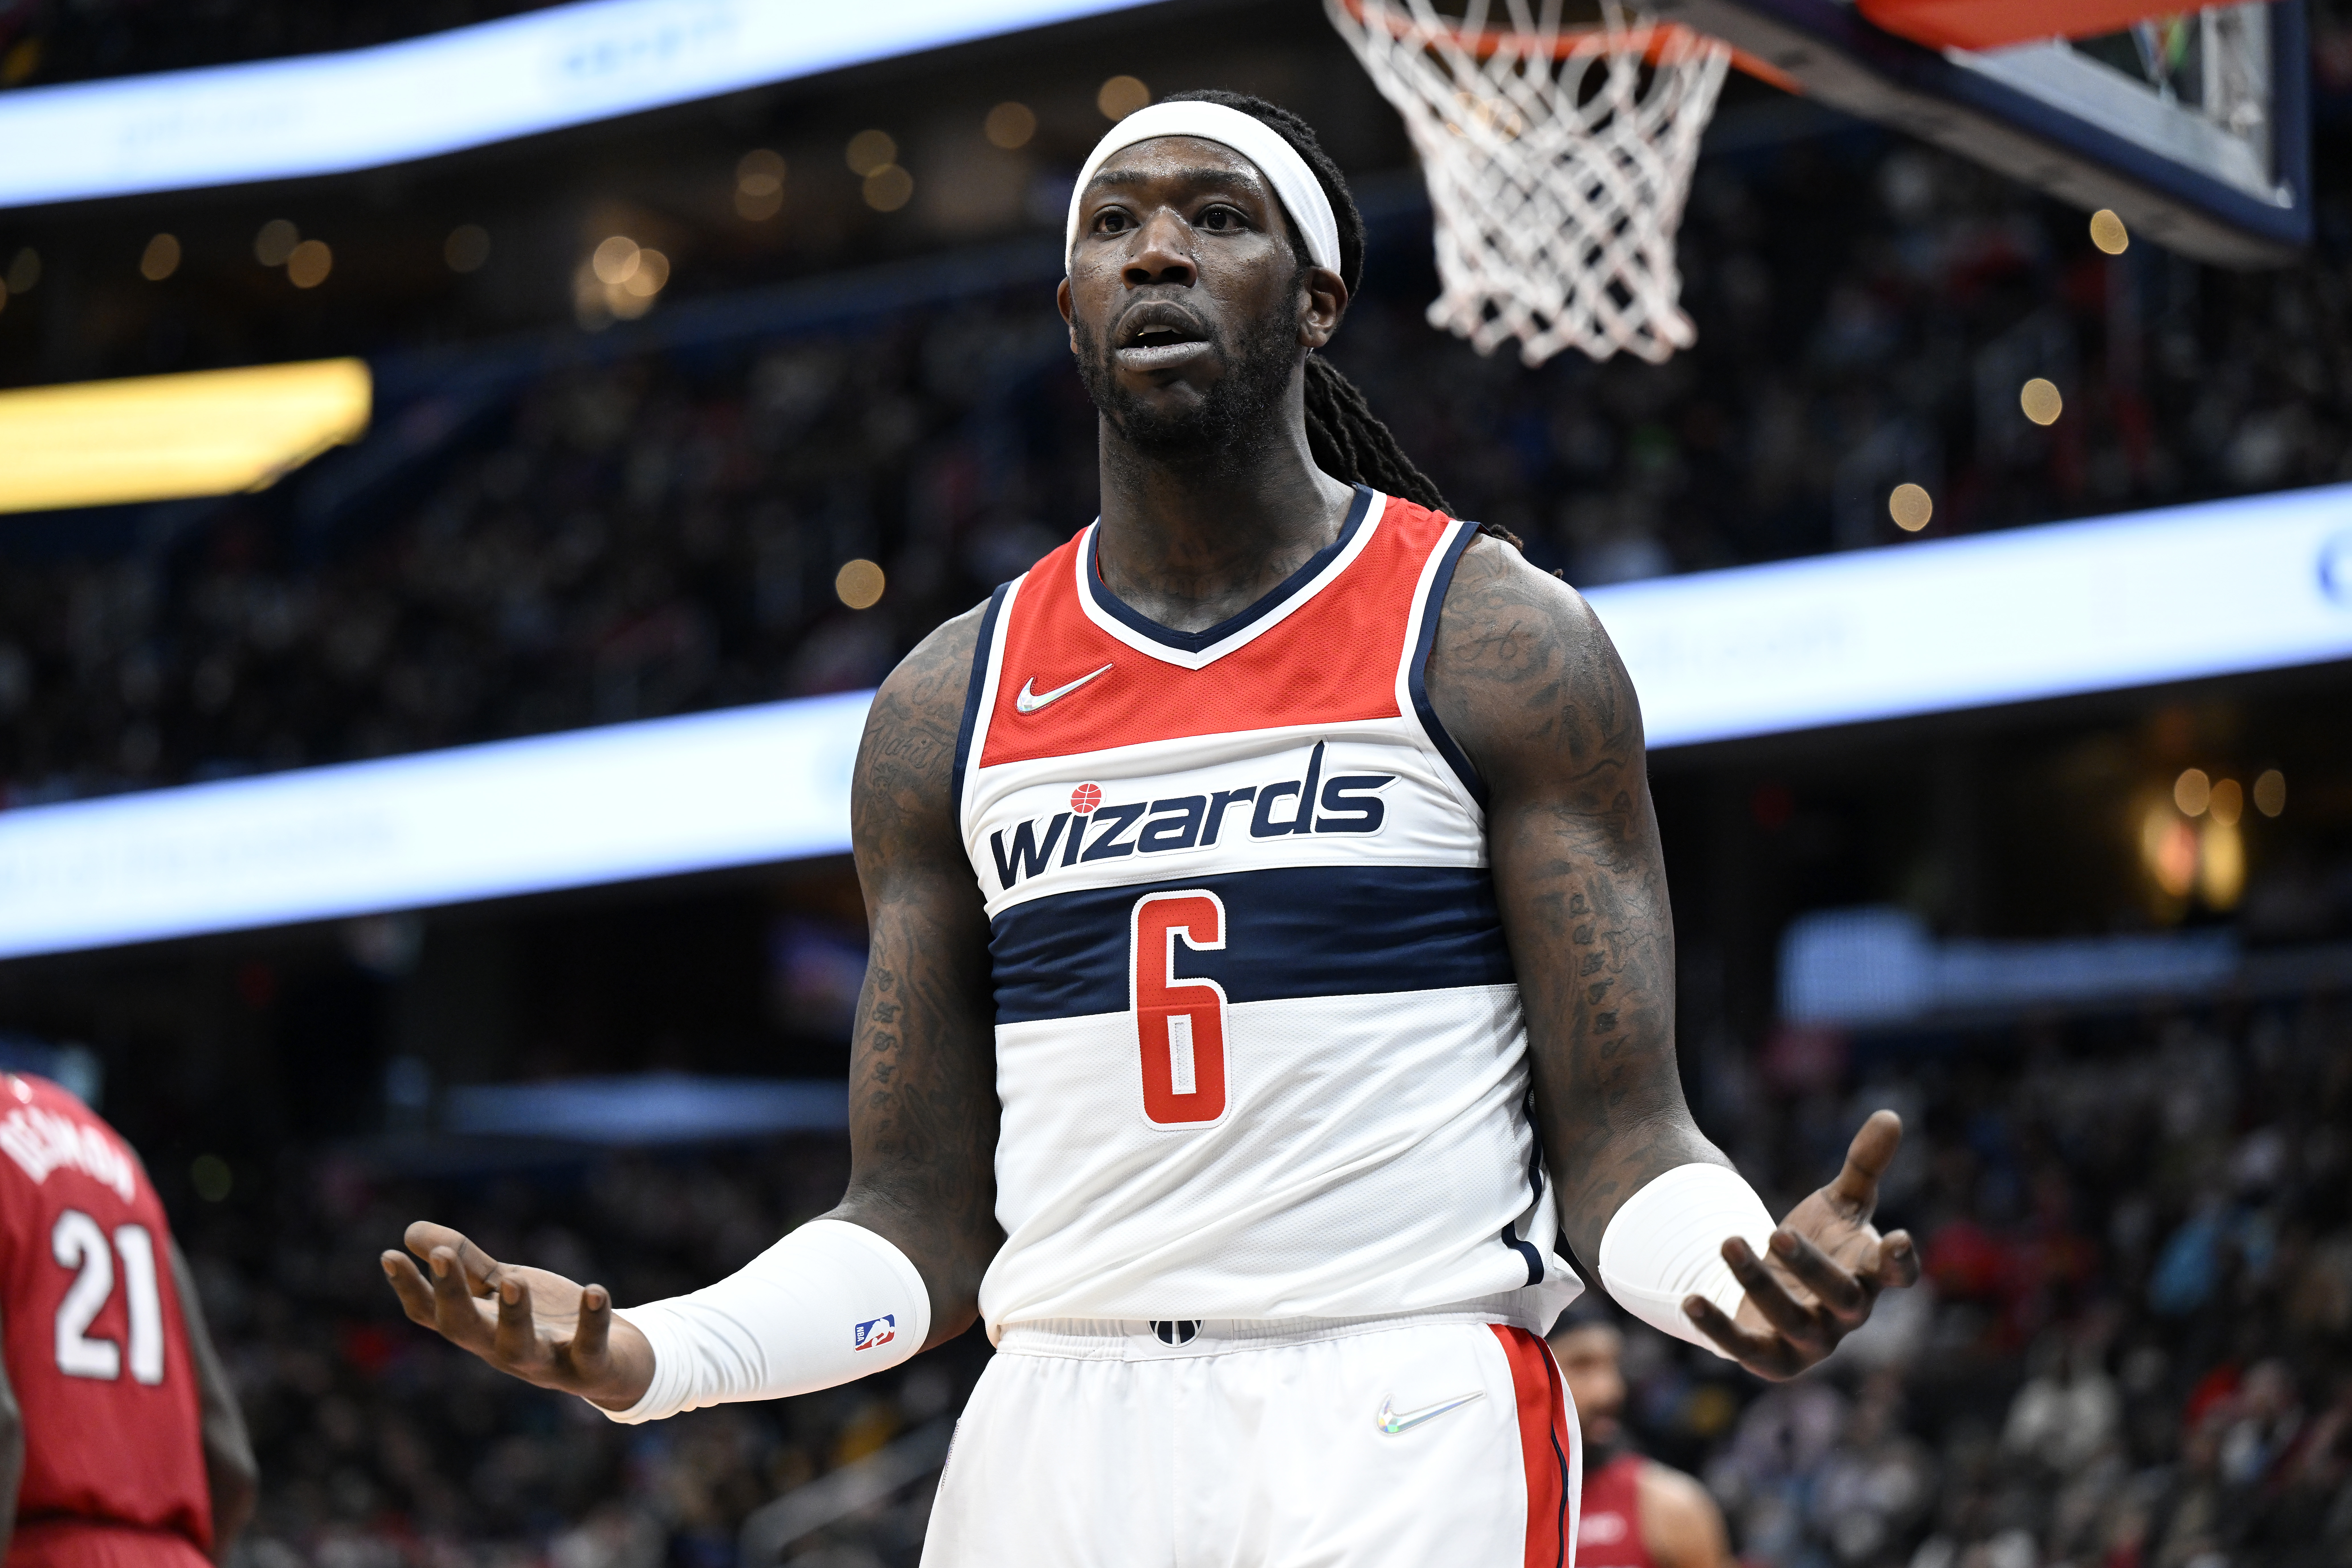 Montrezl Harrell #6 of the Washington Wizards reacts to a call during the game against the Miami Heatat Capital One Arena on February 07, 2022 in Washington, DC.